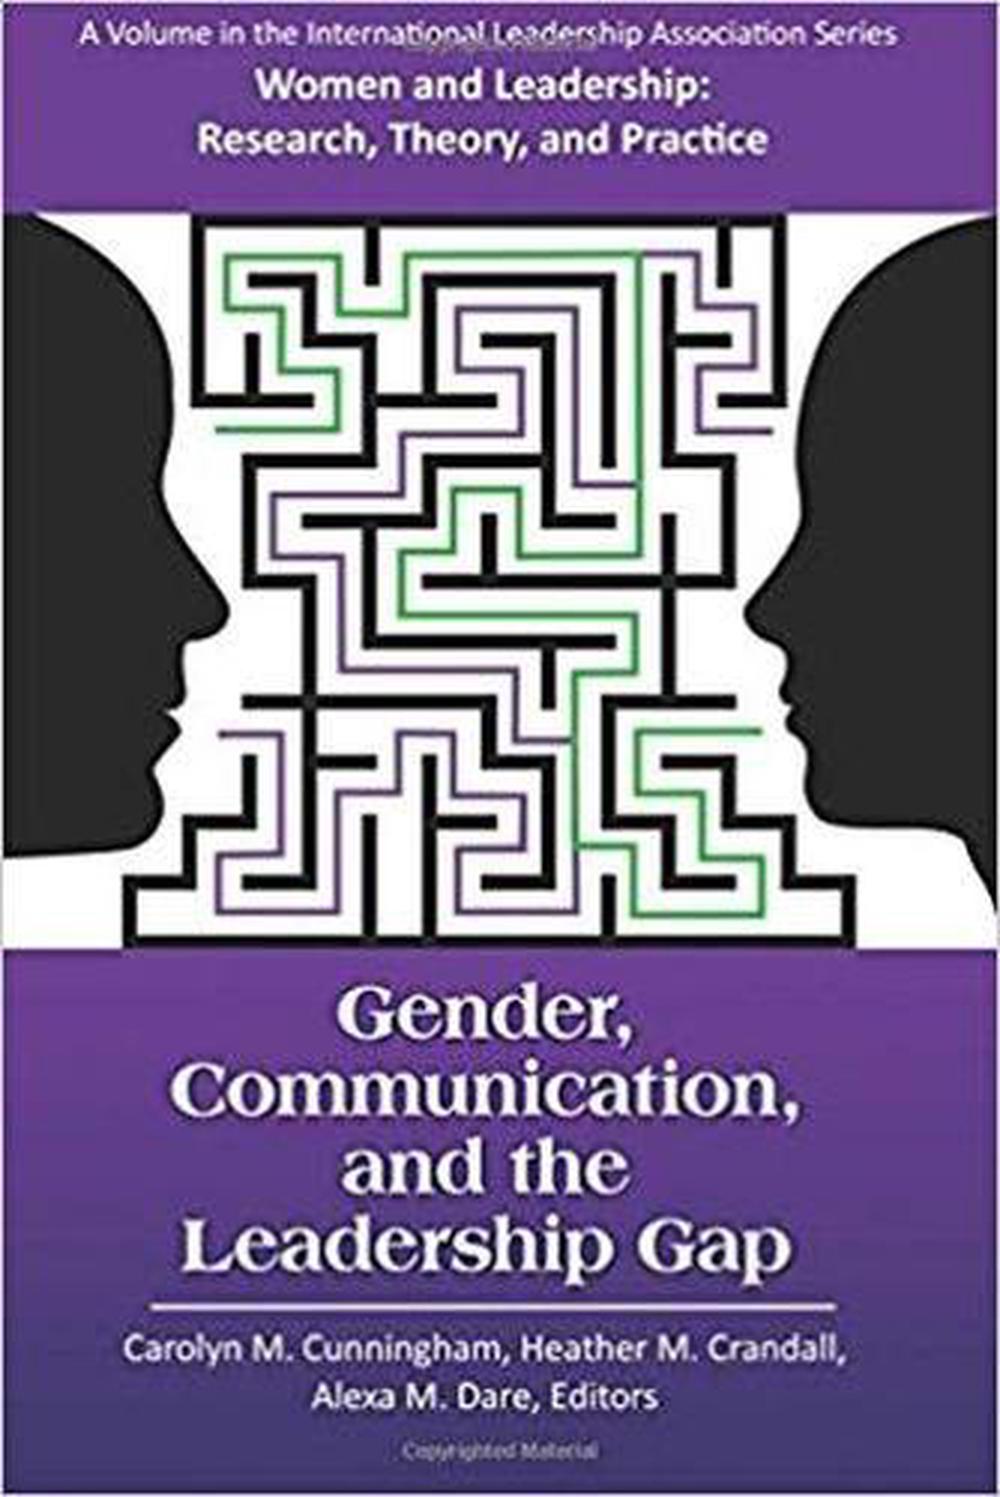 Gender, Communication, and the Leadership Gap Hardcover Book Free